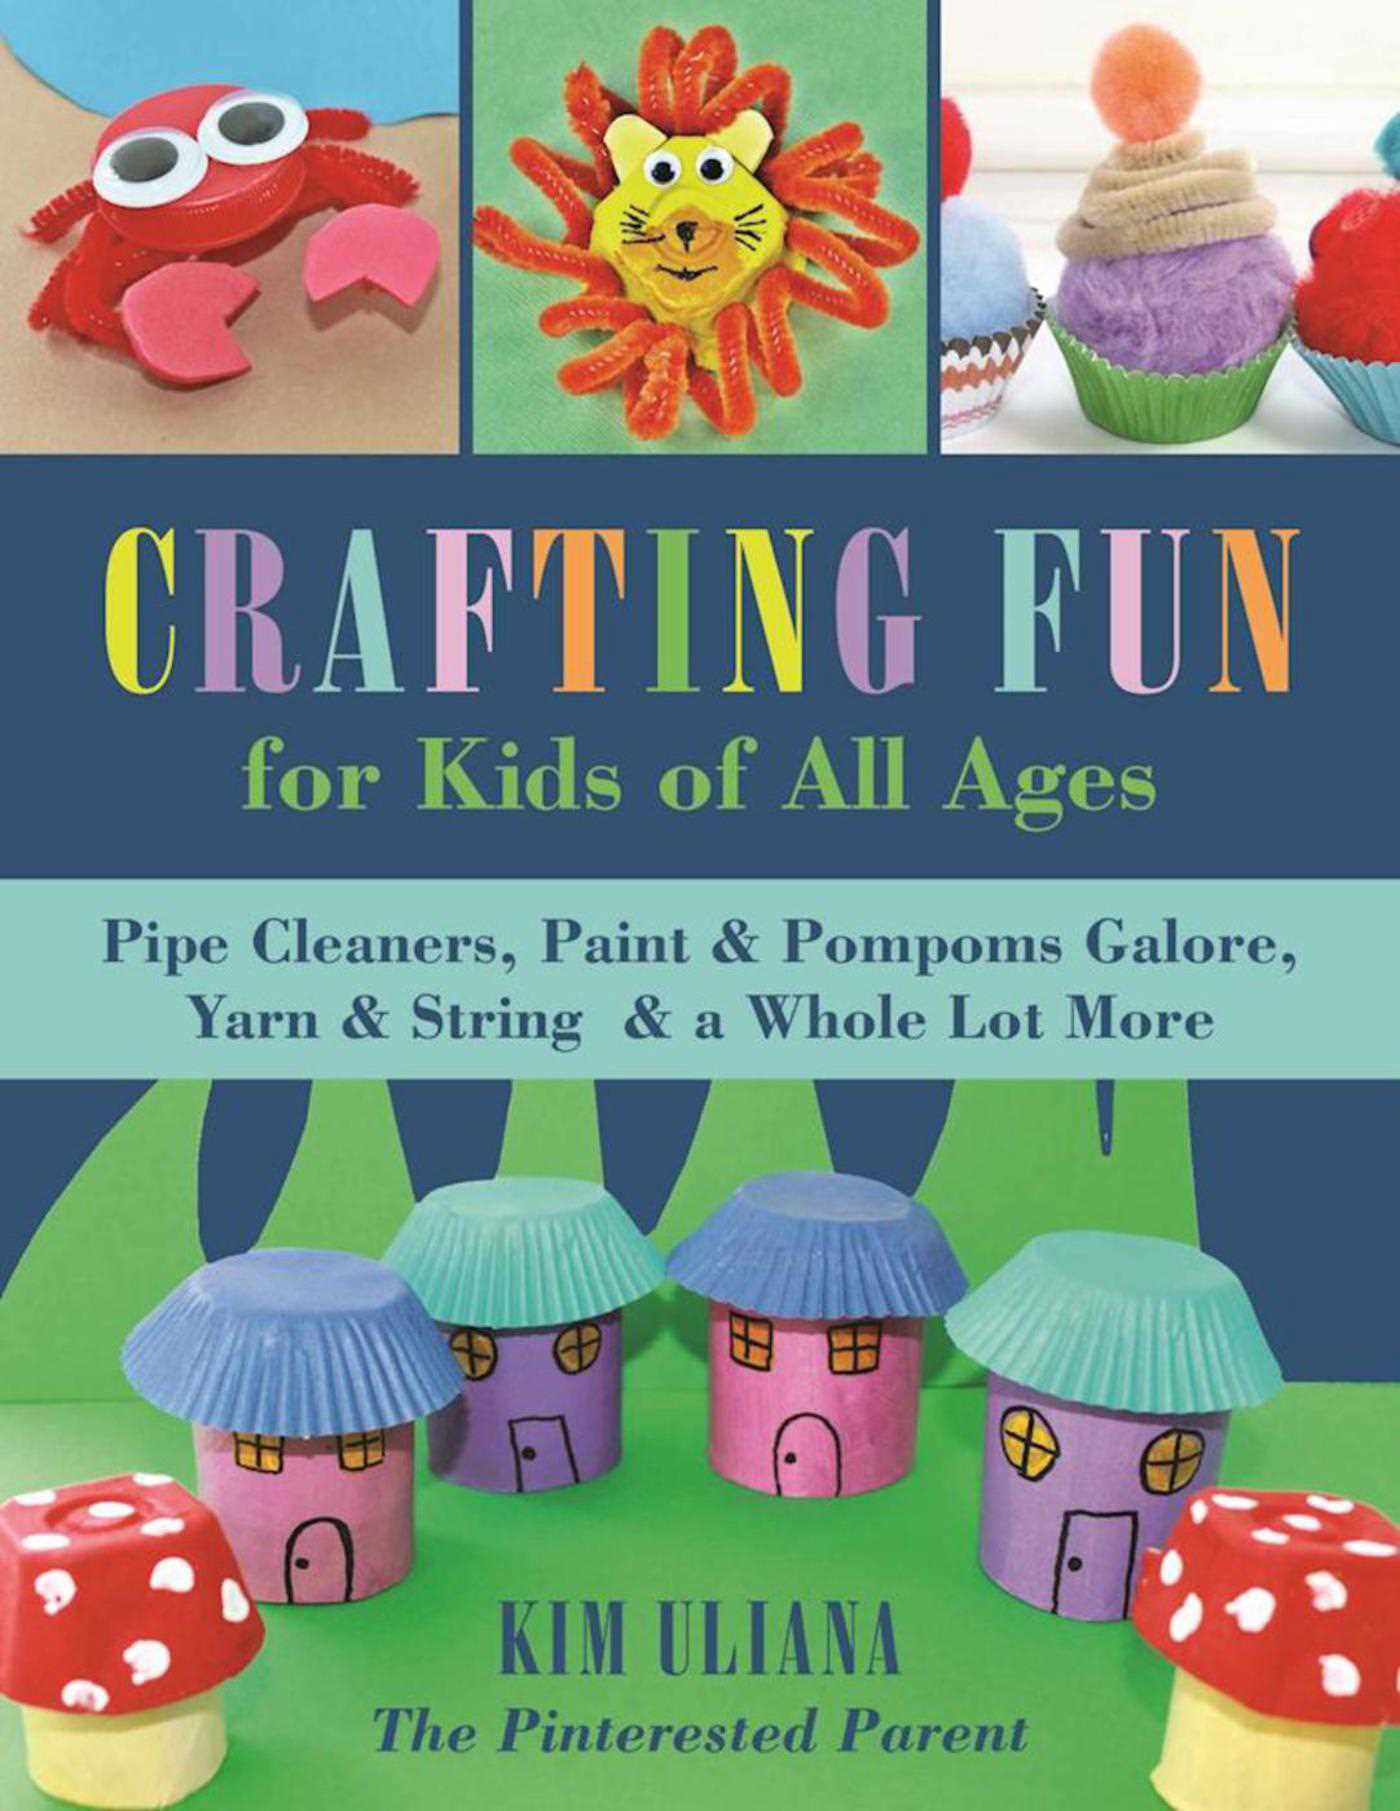 Crafting Fun for Kids of All Ages : Pipe Cleaners, Paint & Pom-Poms Galore, Yarn & String & a Whole Lot More